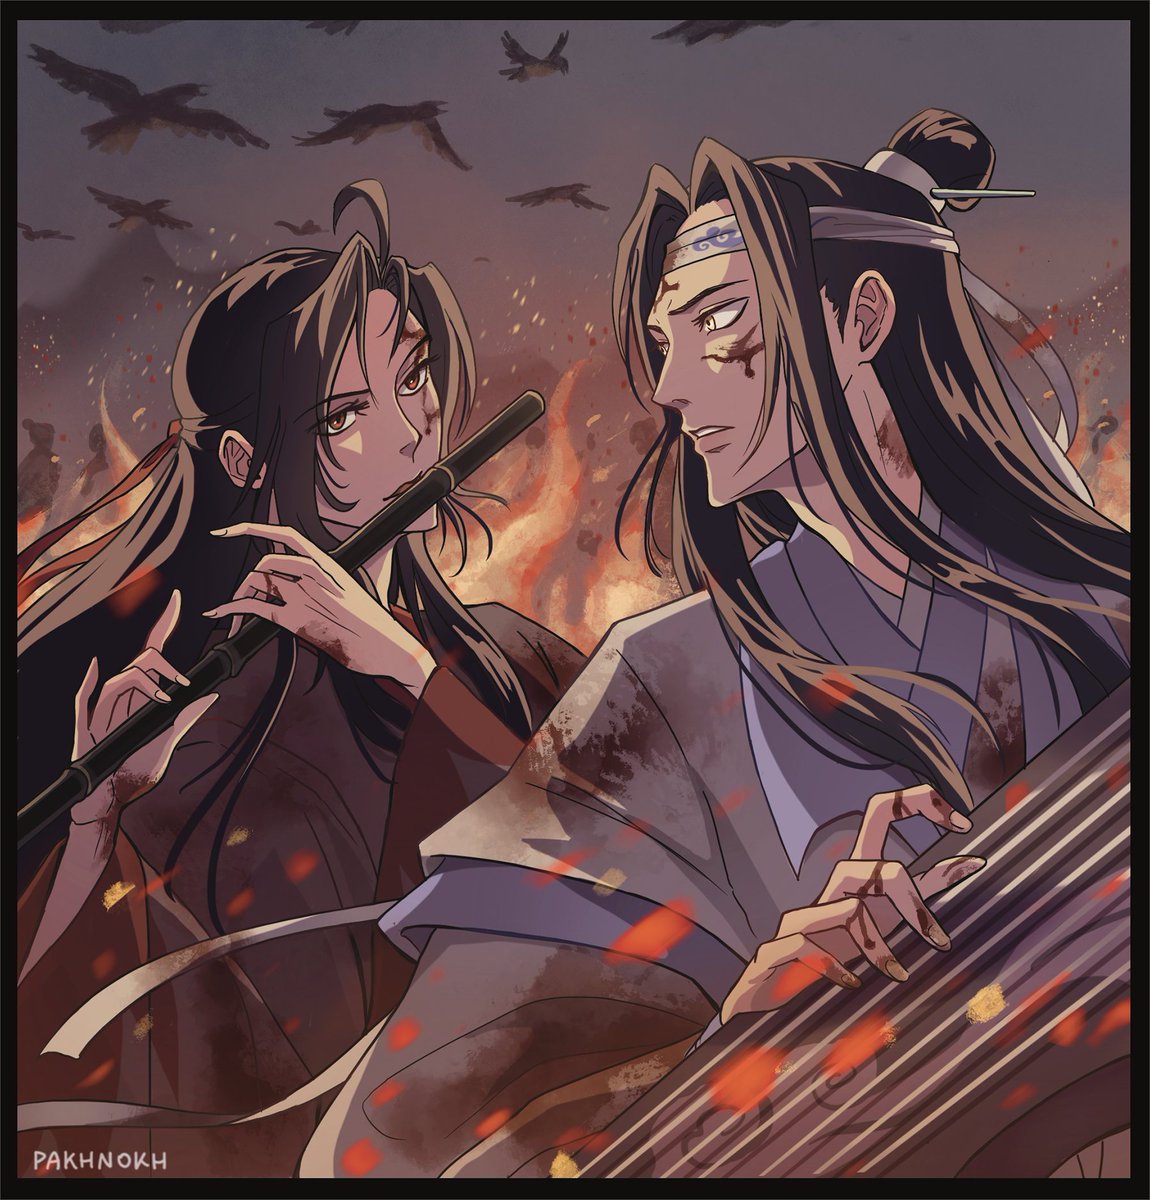 Those two are subliminally flirting even on the Sunshot Campaign battlefield.... *sigh* (2022) #MDZS